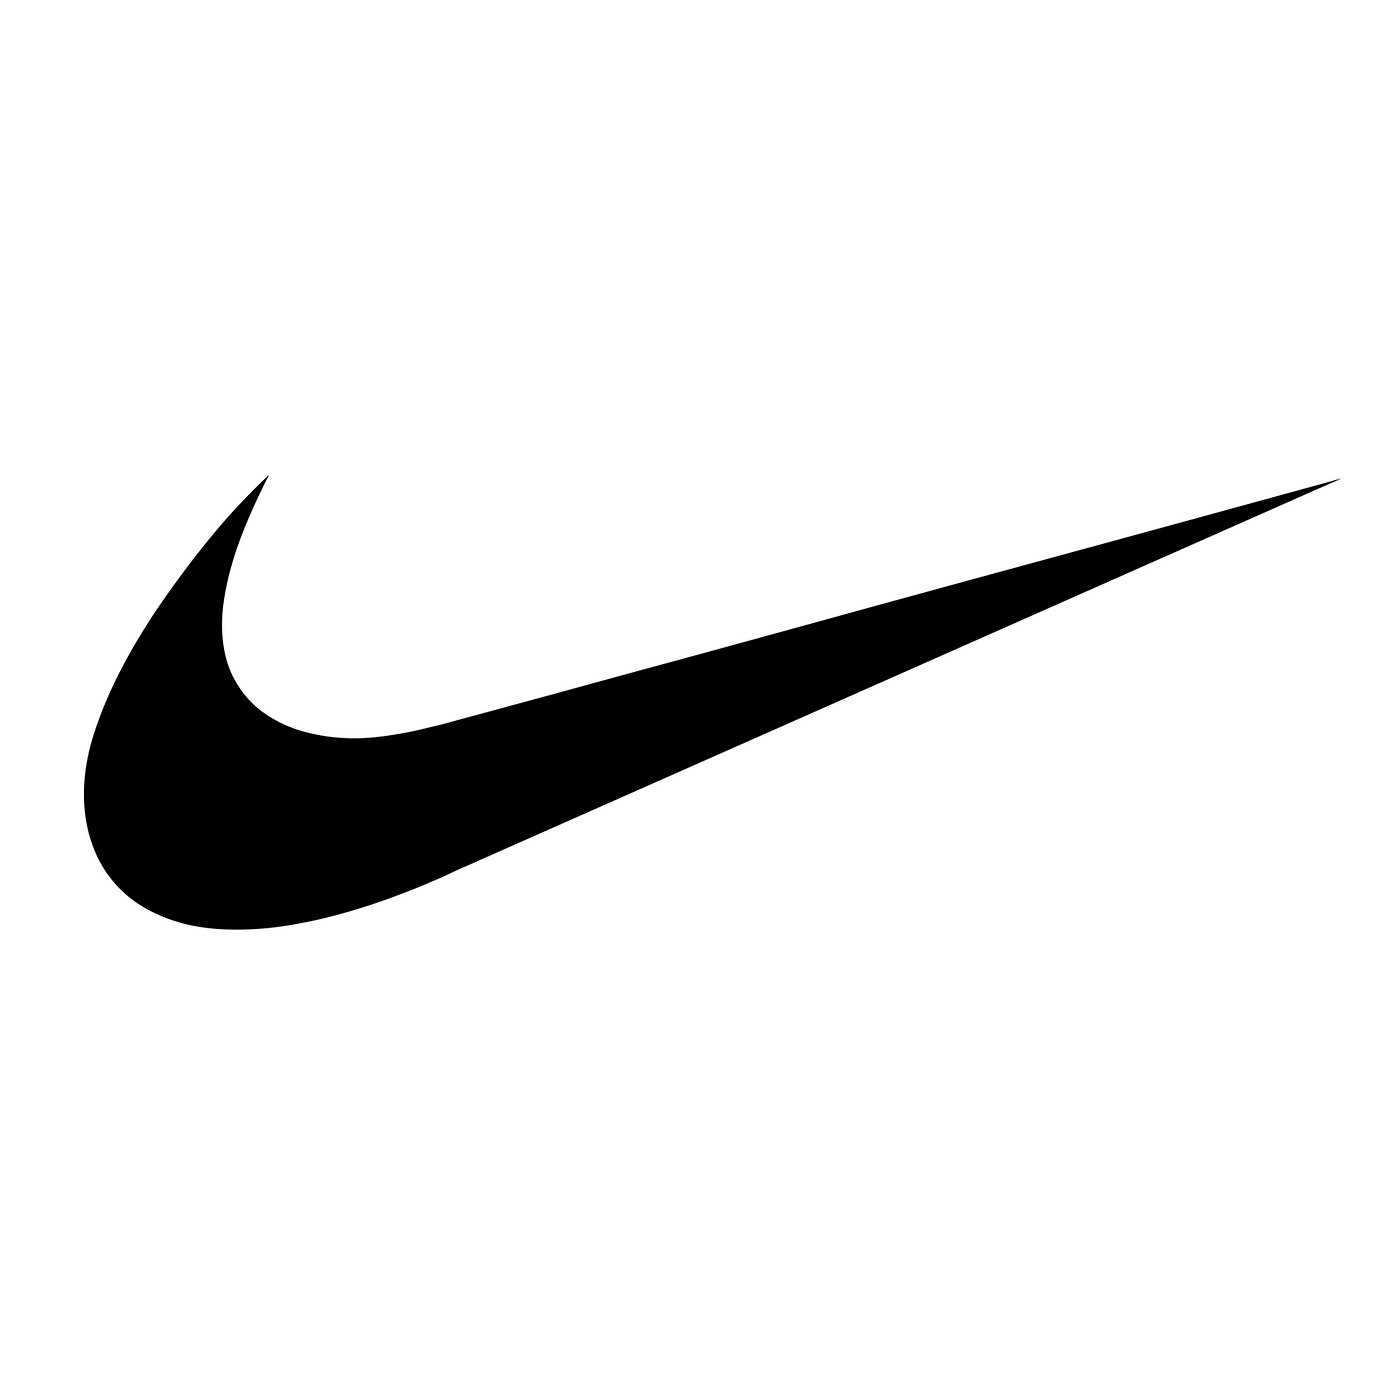 How Nike used Brand Equity to become the Best Sports Apparel Brand